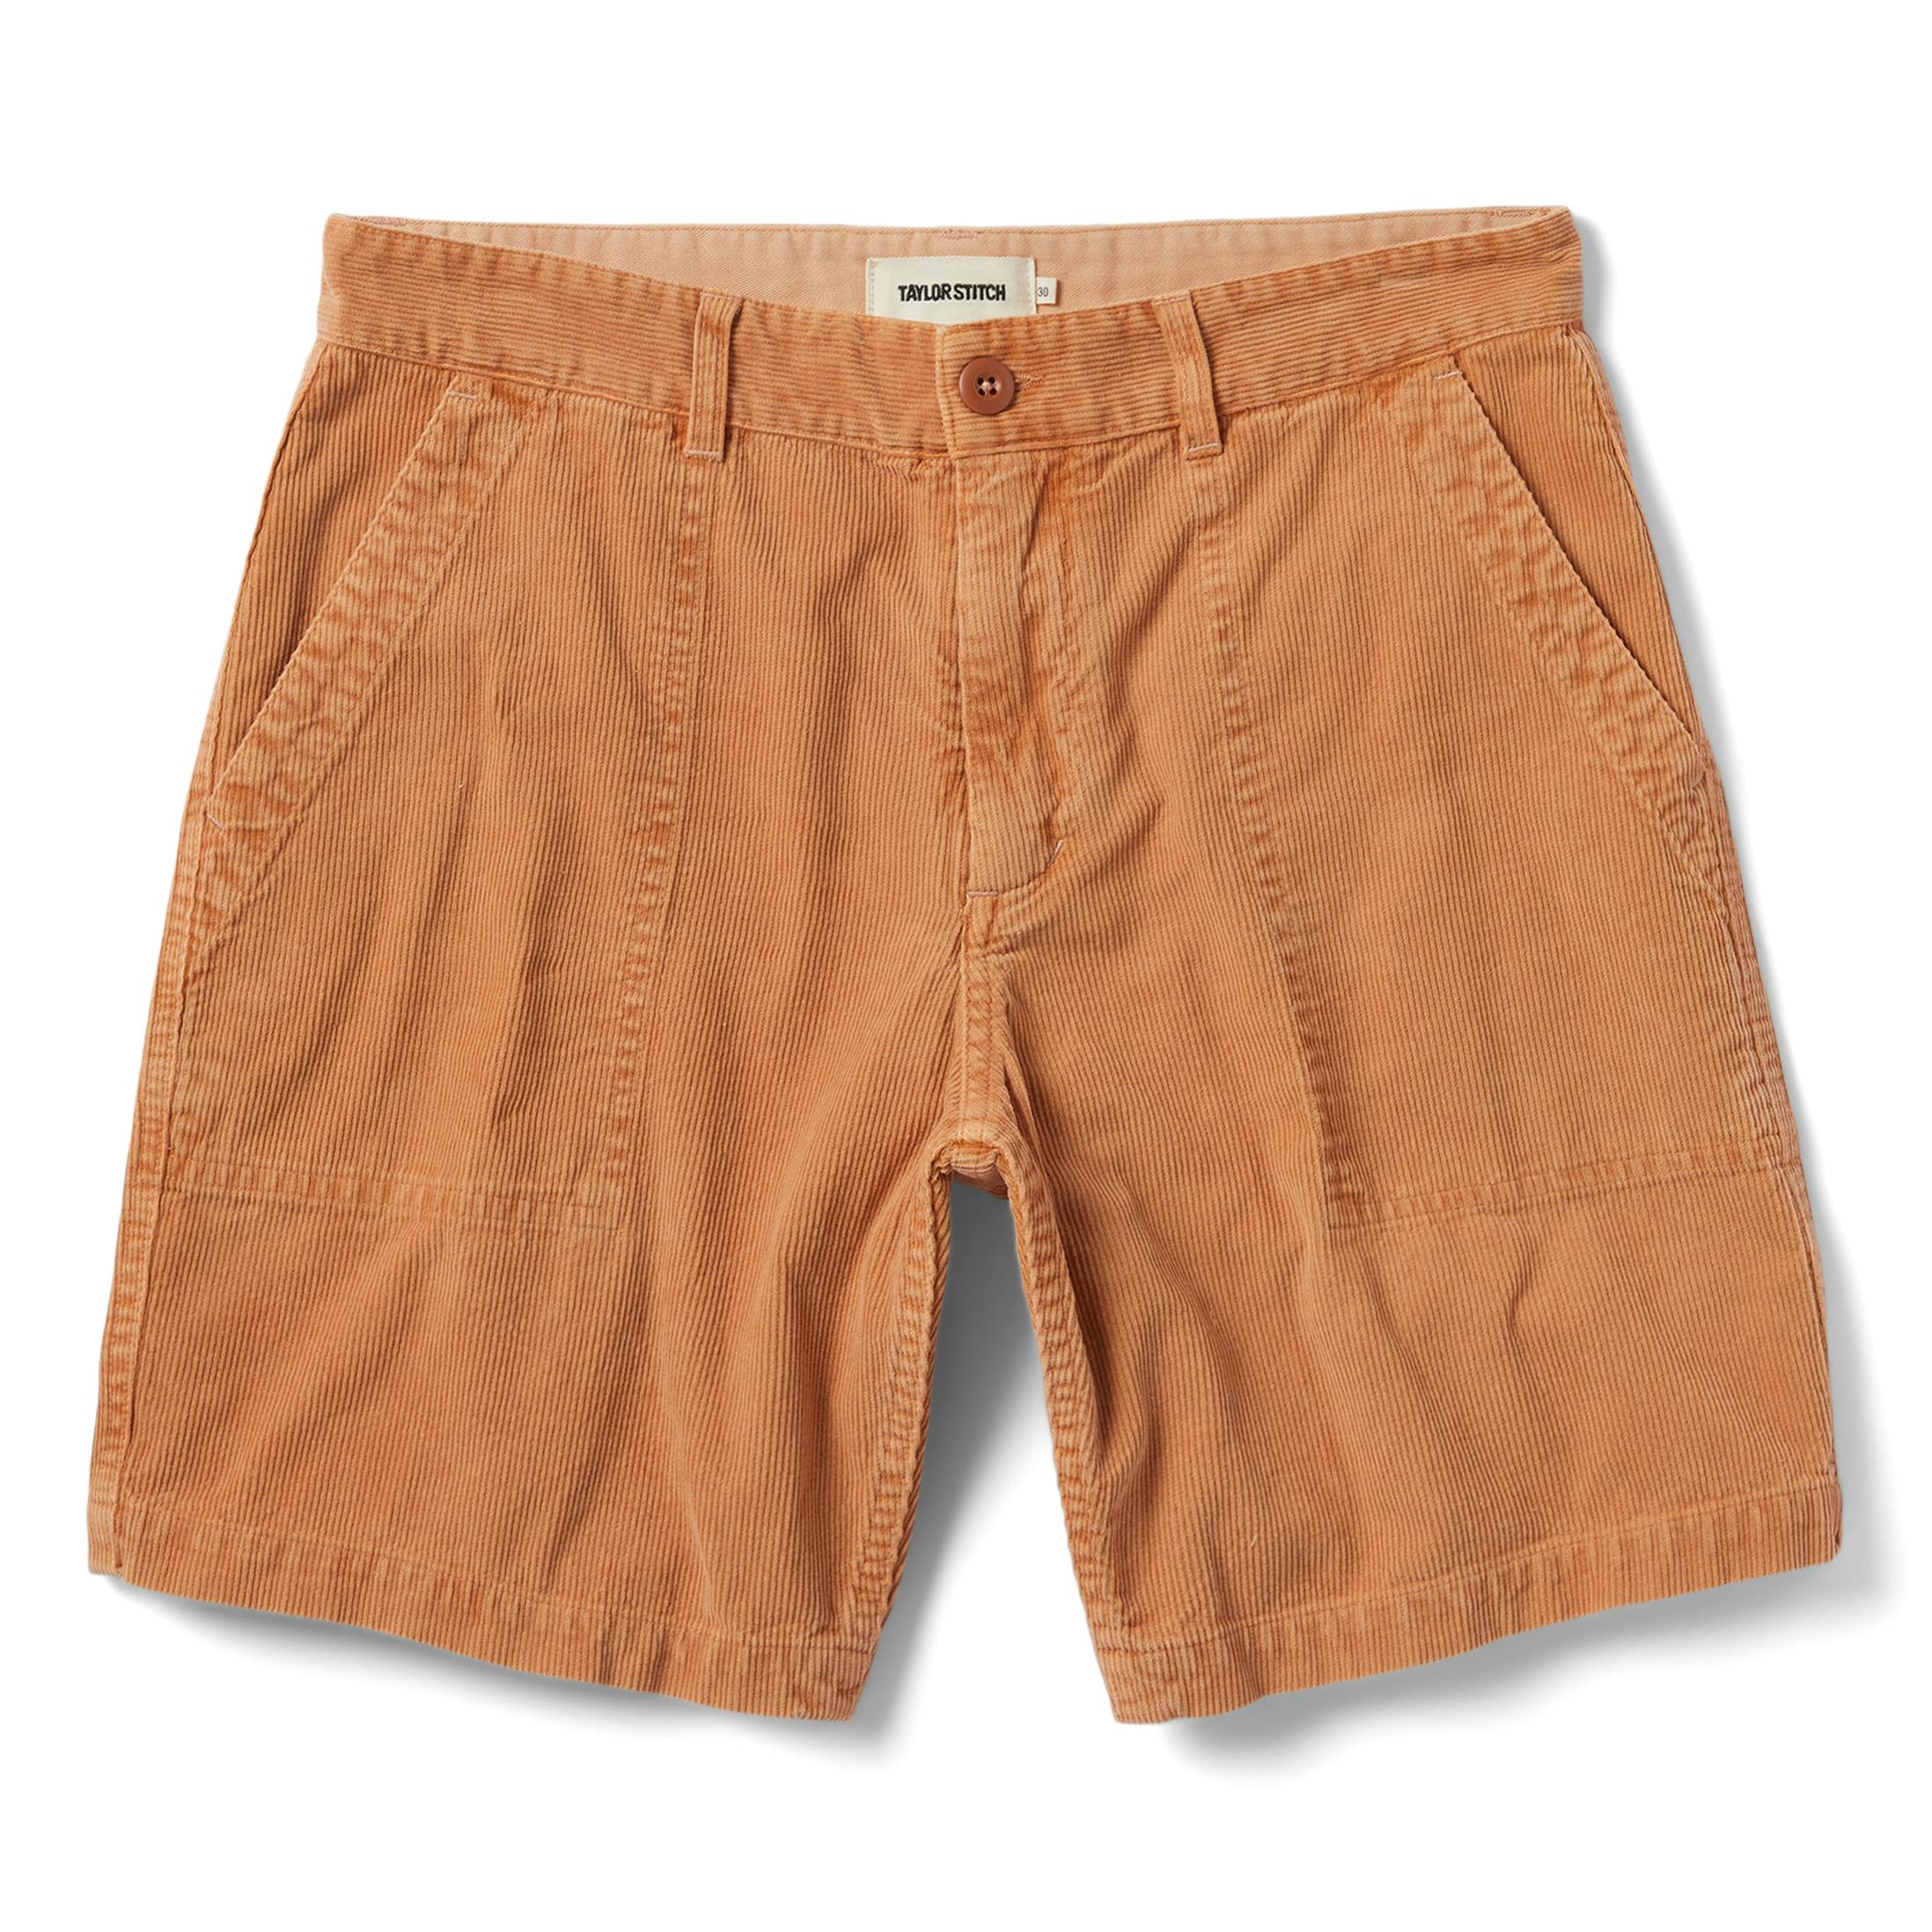 The Trail Short - 8"